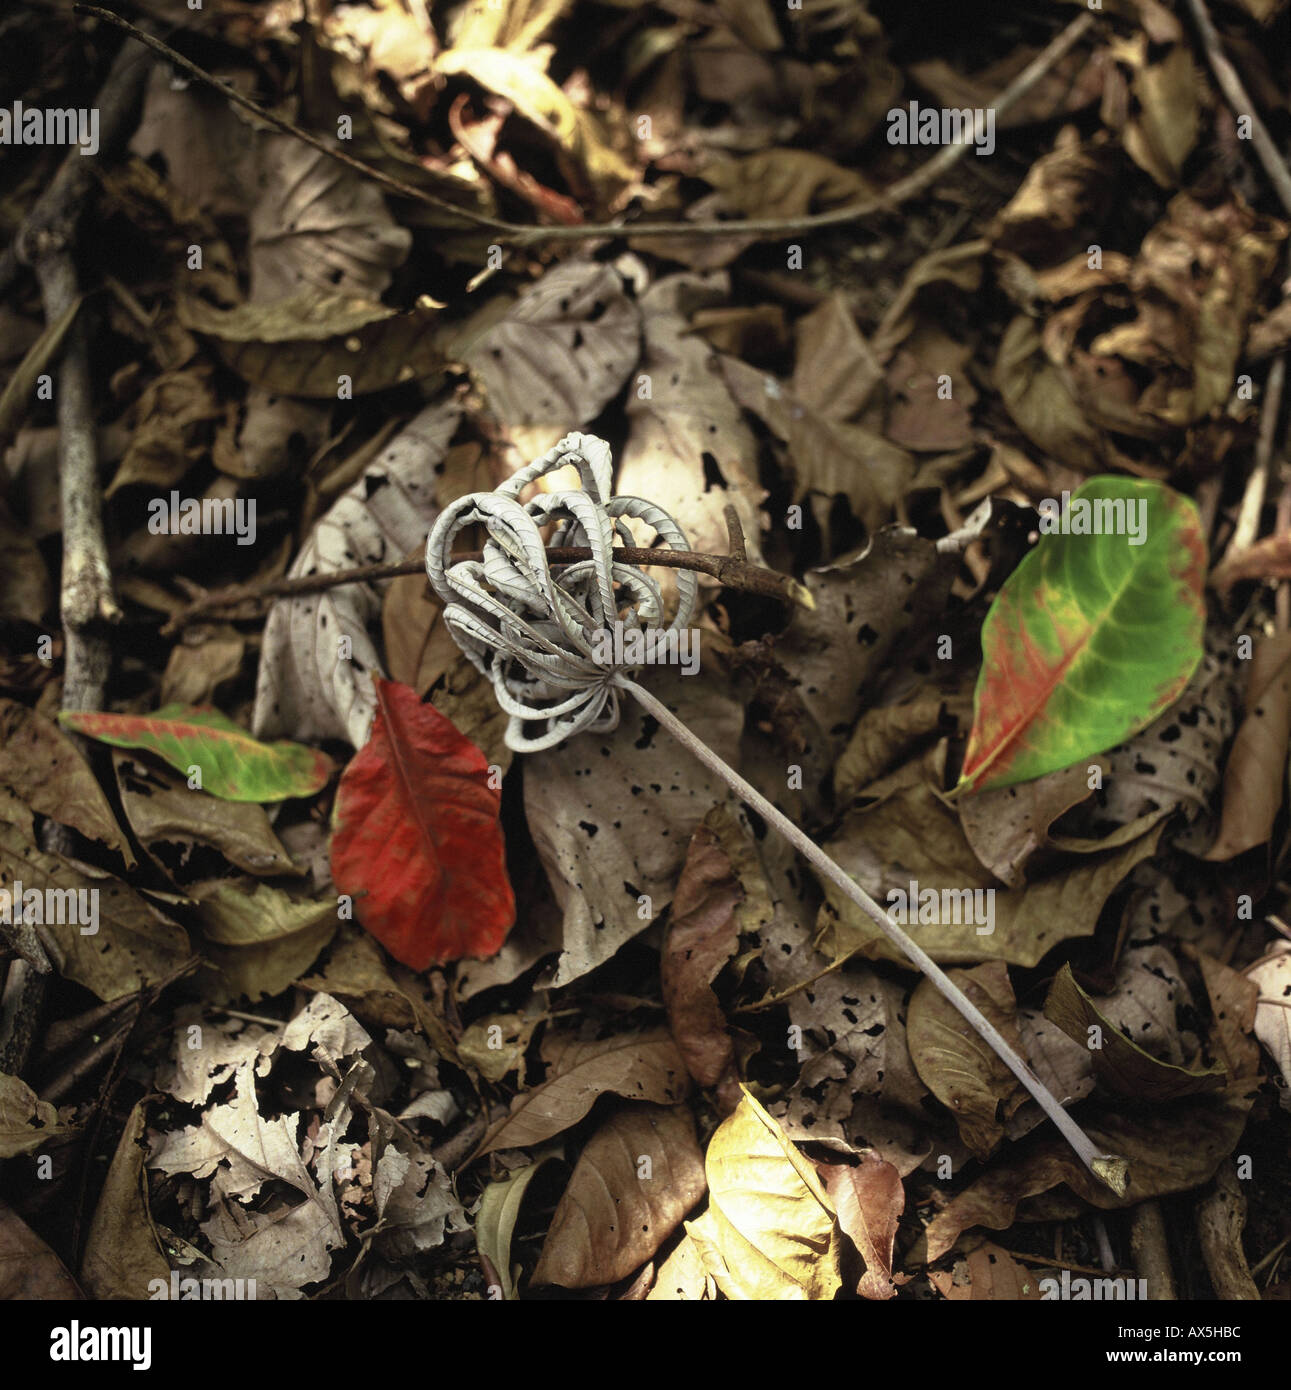 Amazon, Brazil. Leaf litter of Cecropia sp. on the forest floor. Stock Photo